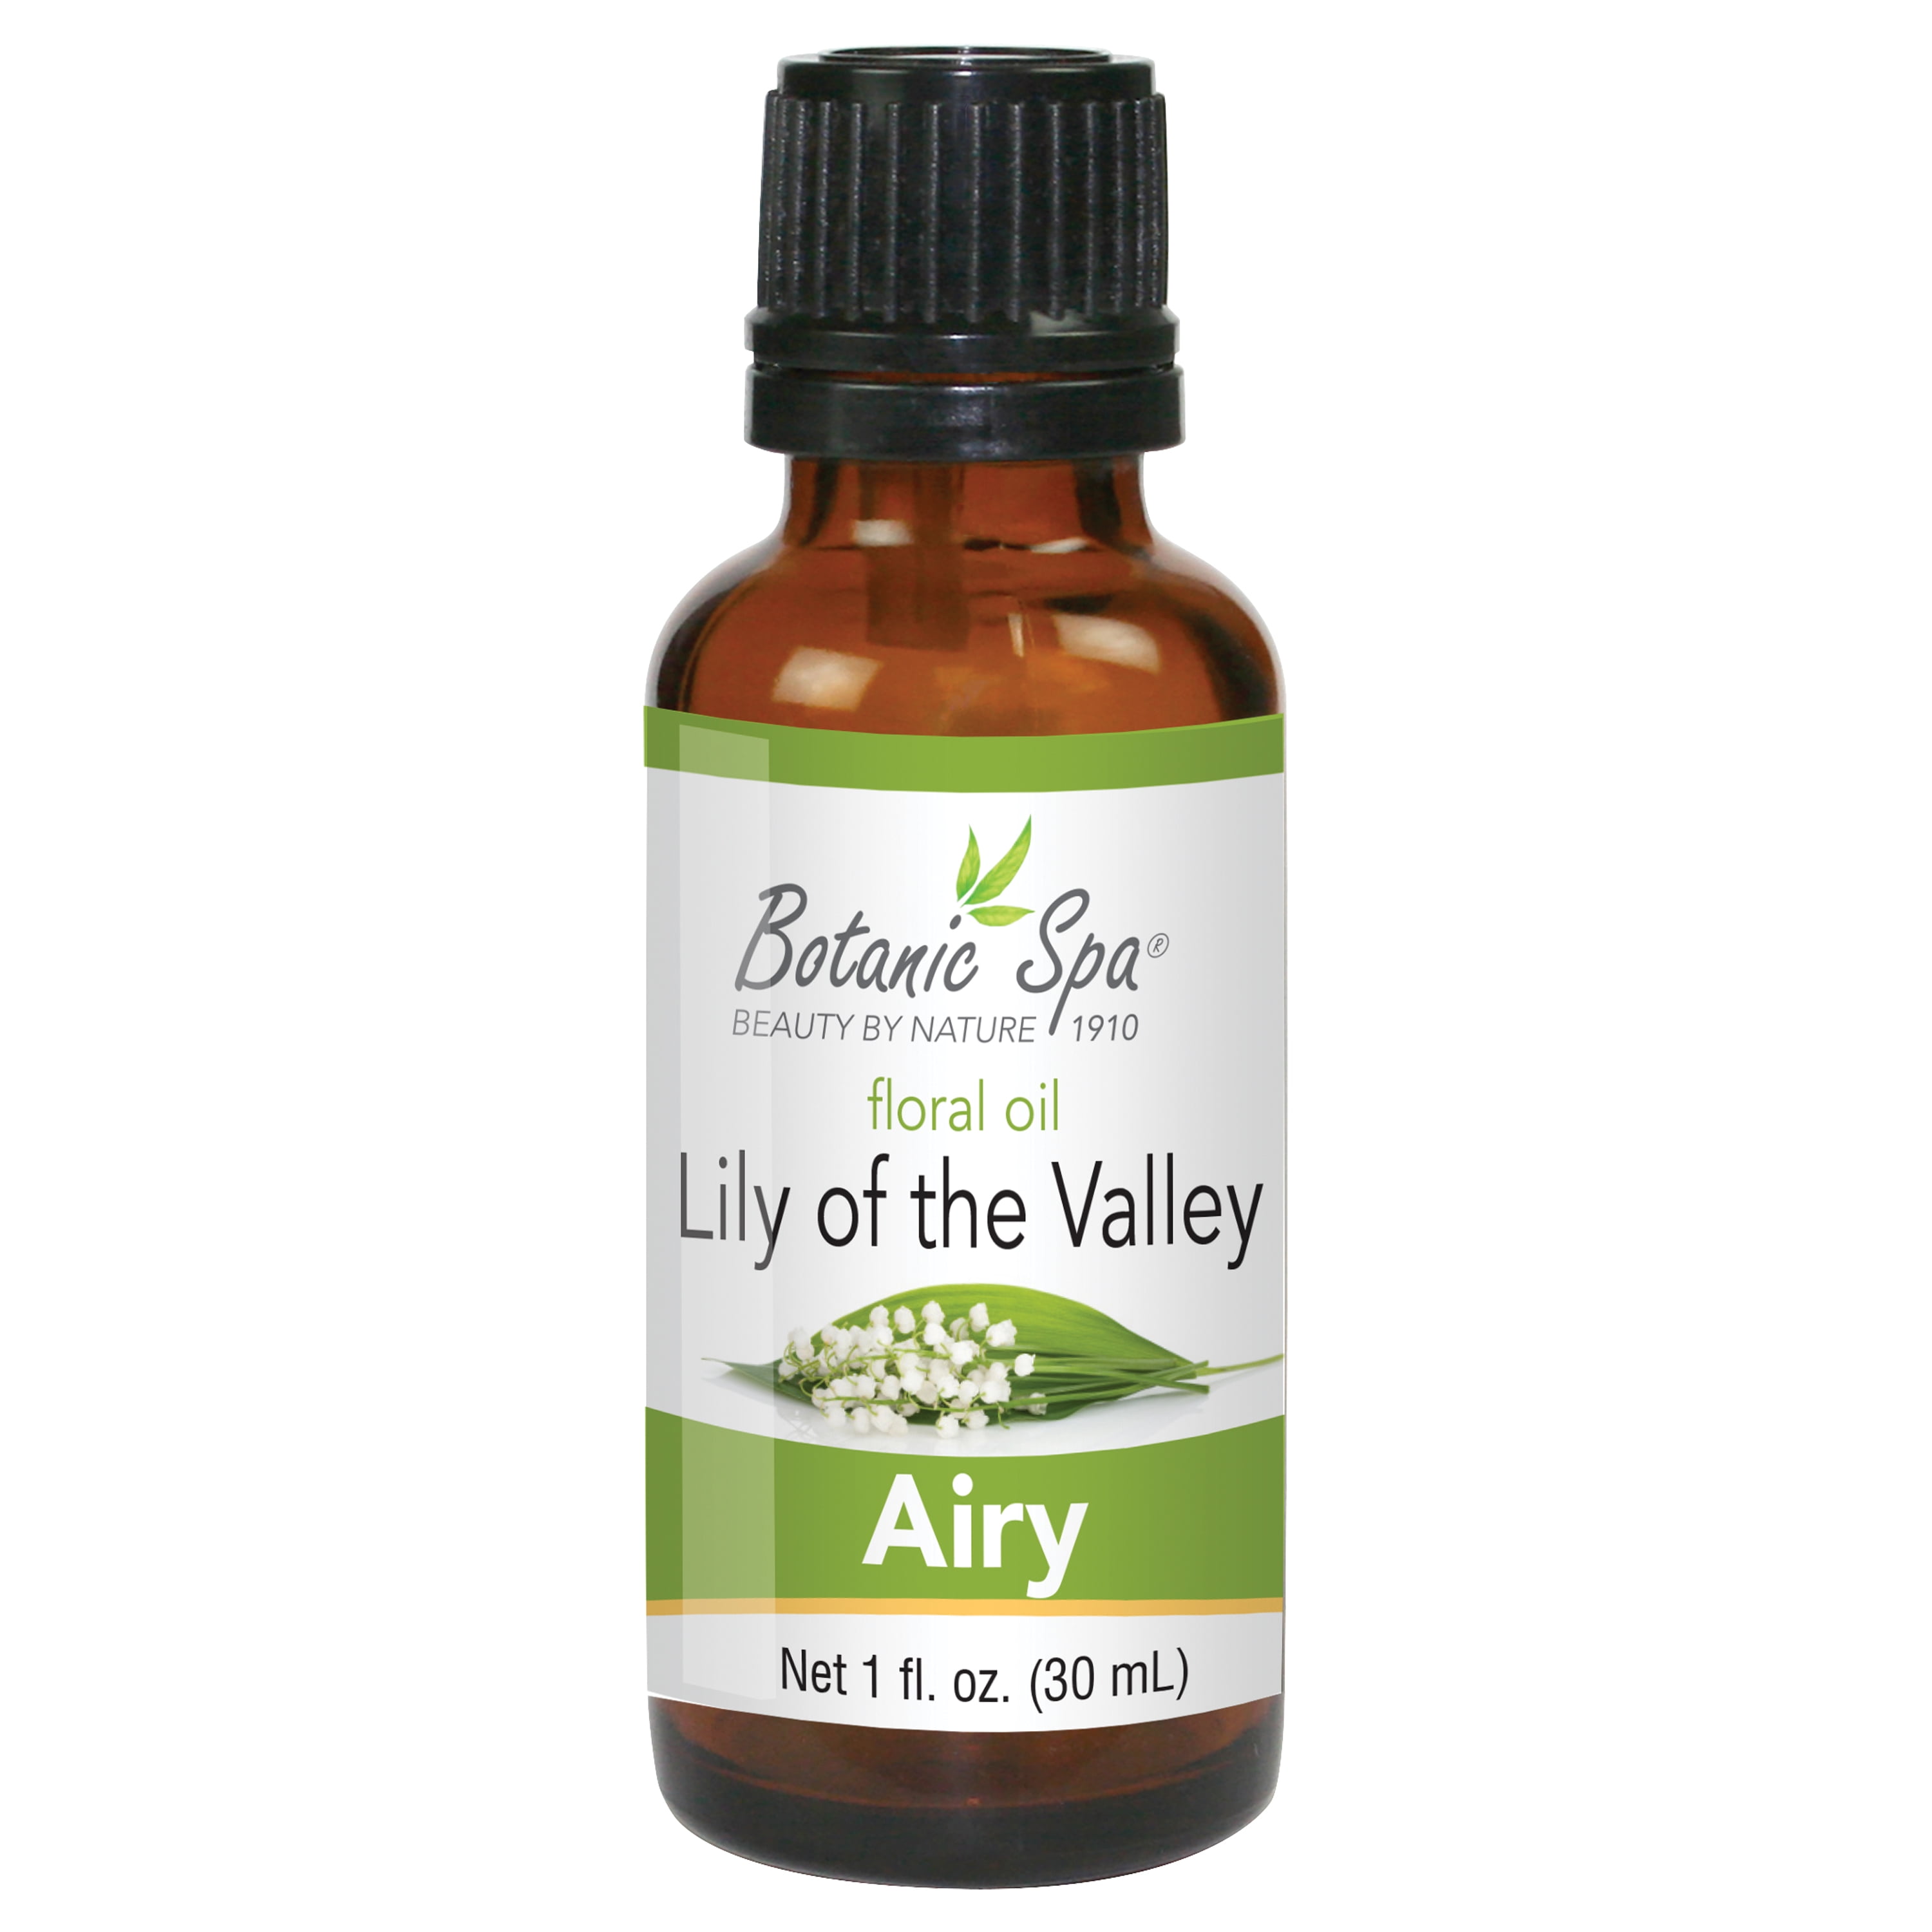 Botanic Spa Lily of the Valley Floral Oil Essential Oil, 1 fl oz